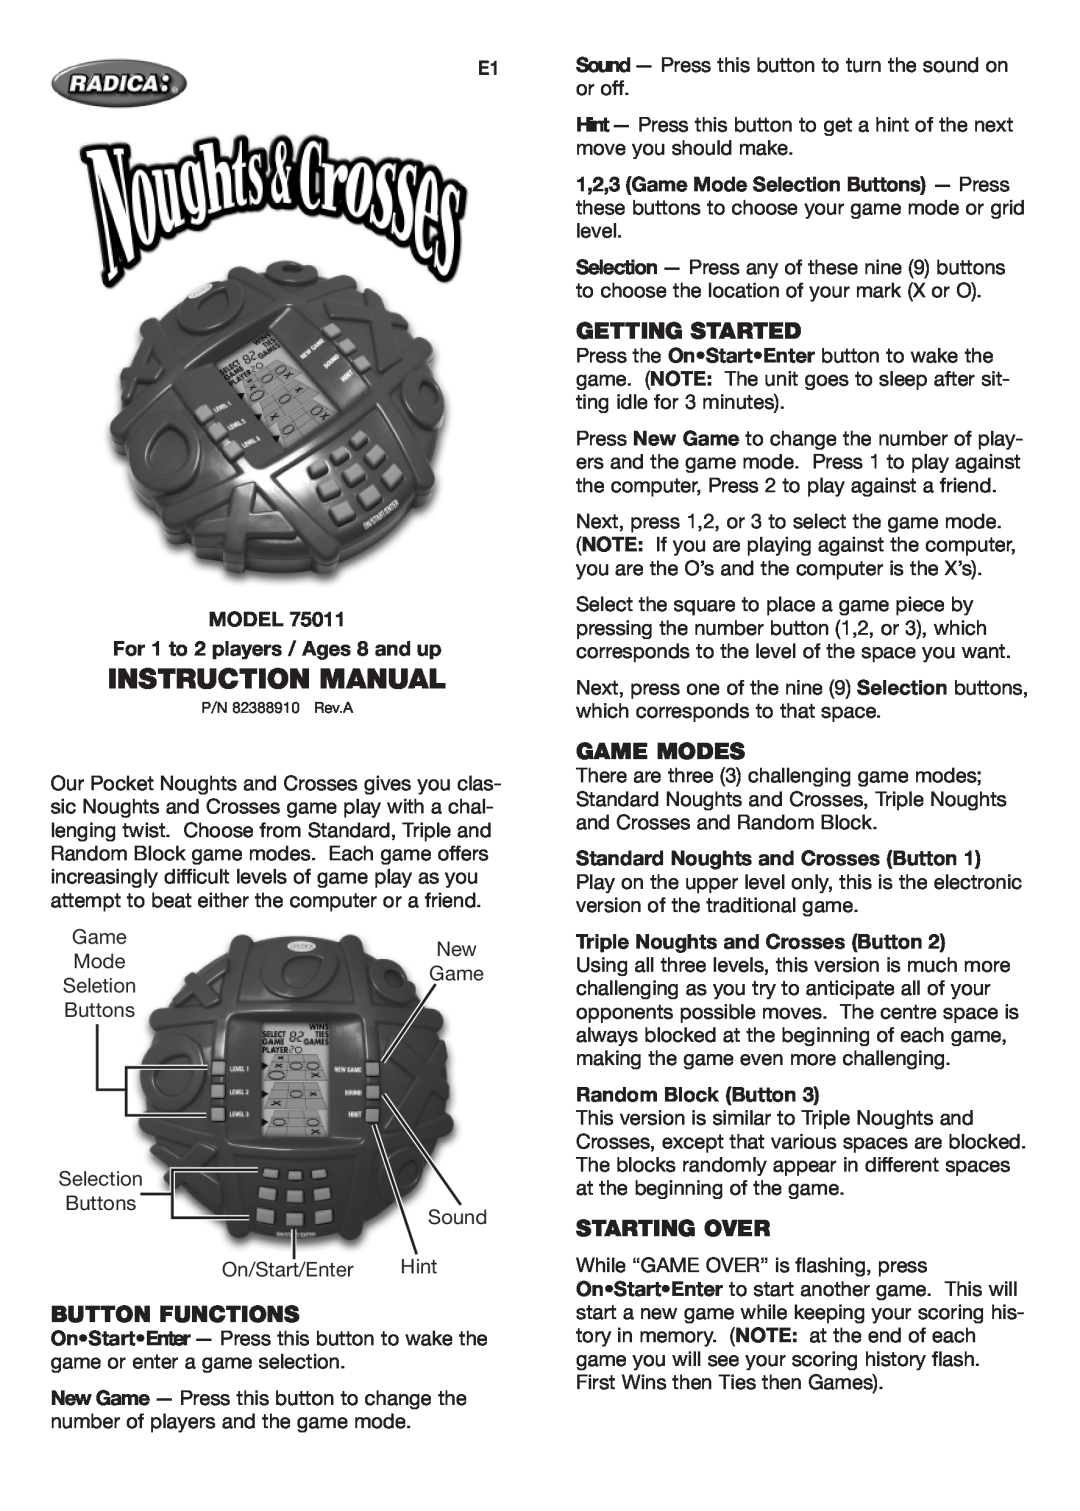 Radica Games 75011 instruction manual Getting Started, Game Modes, Button Functions, Starting Over, Random Block Button 